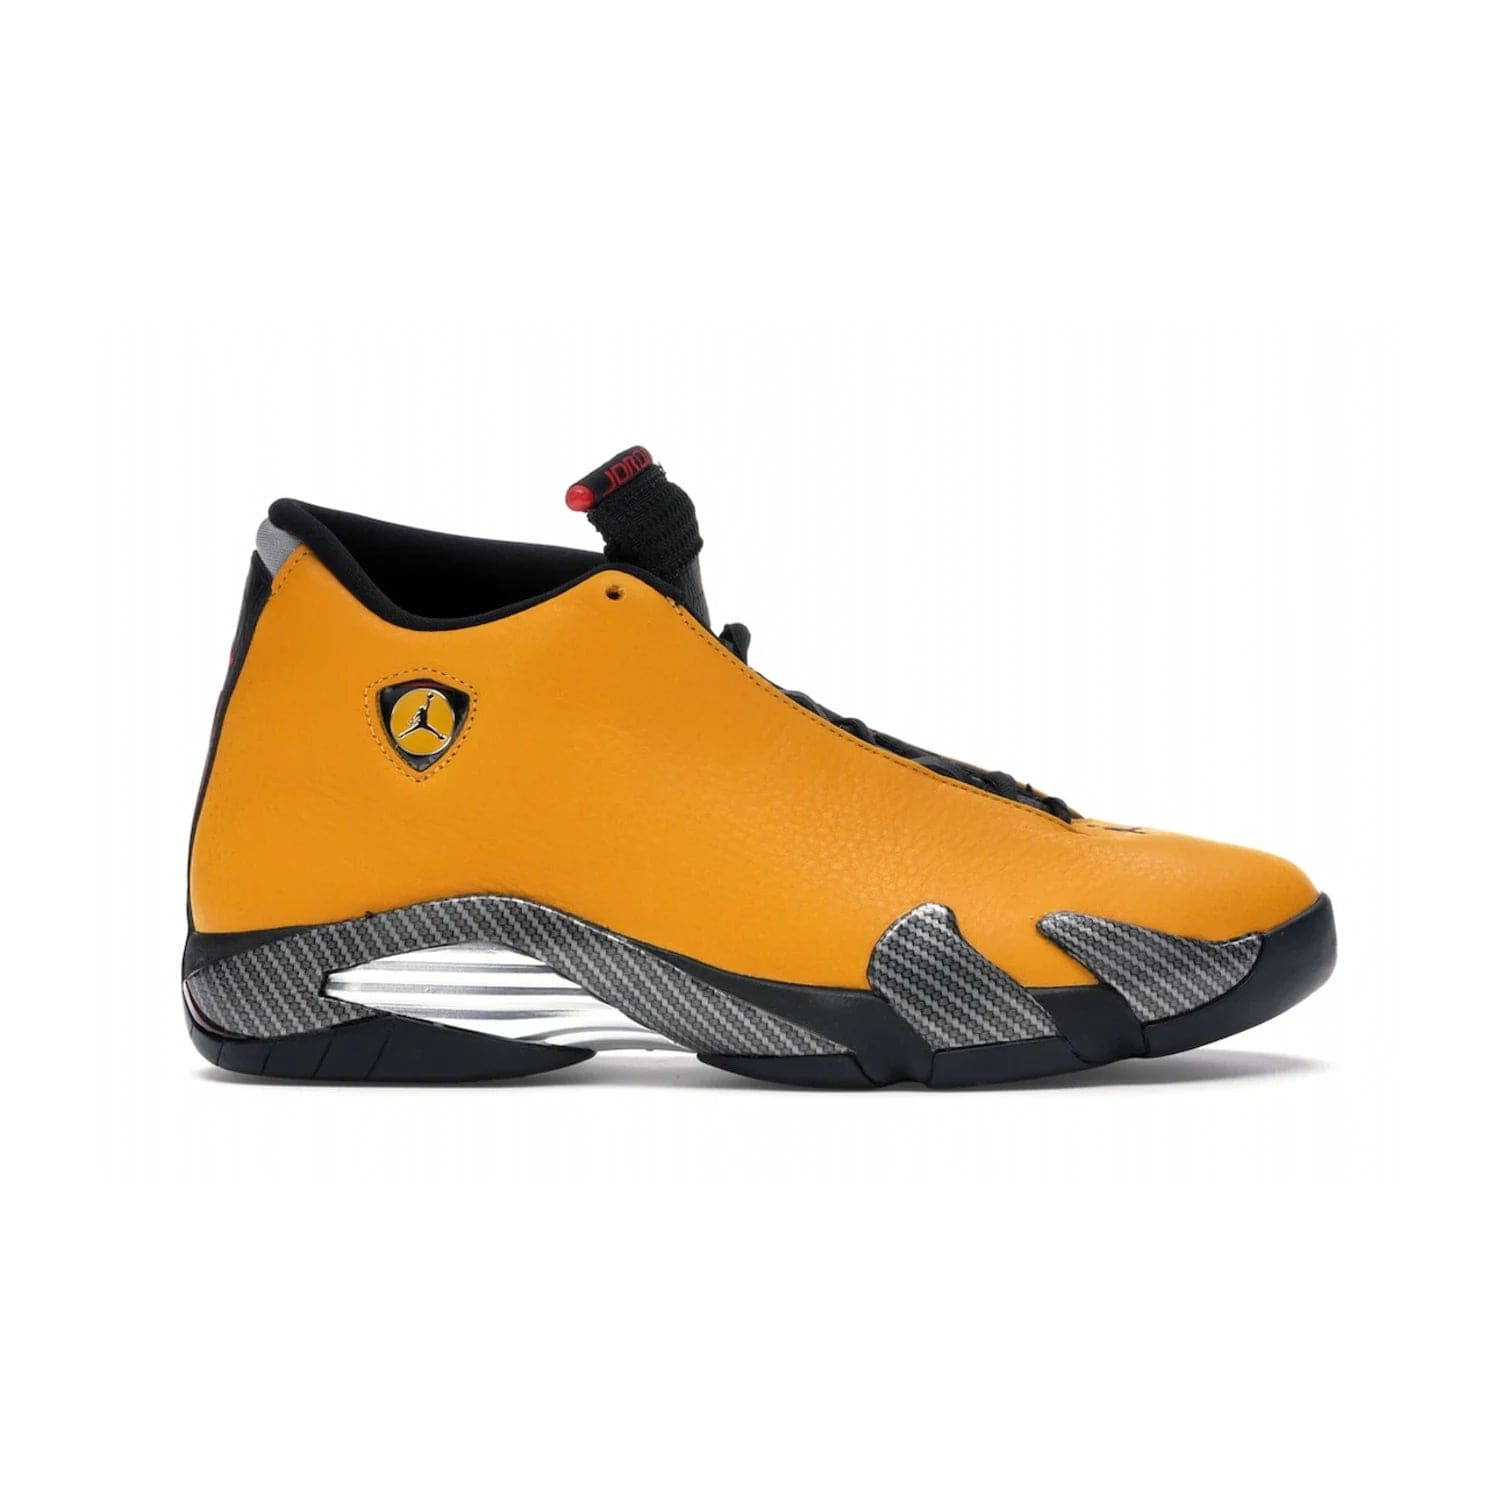 Jordan 14 Retro University Gold - Image 1 - Only at www.BallersClubKickz.com - Air Jordan 14 Retro University Gold: High-quality leather sneaker with Jumpman, tongue & heel logos. Zoom Air units & herringbone traction for superior comfort. University Gold outsole for stylish streetwear.